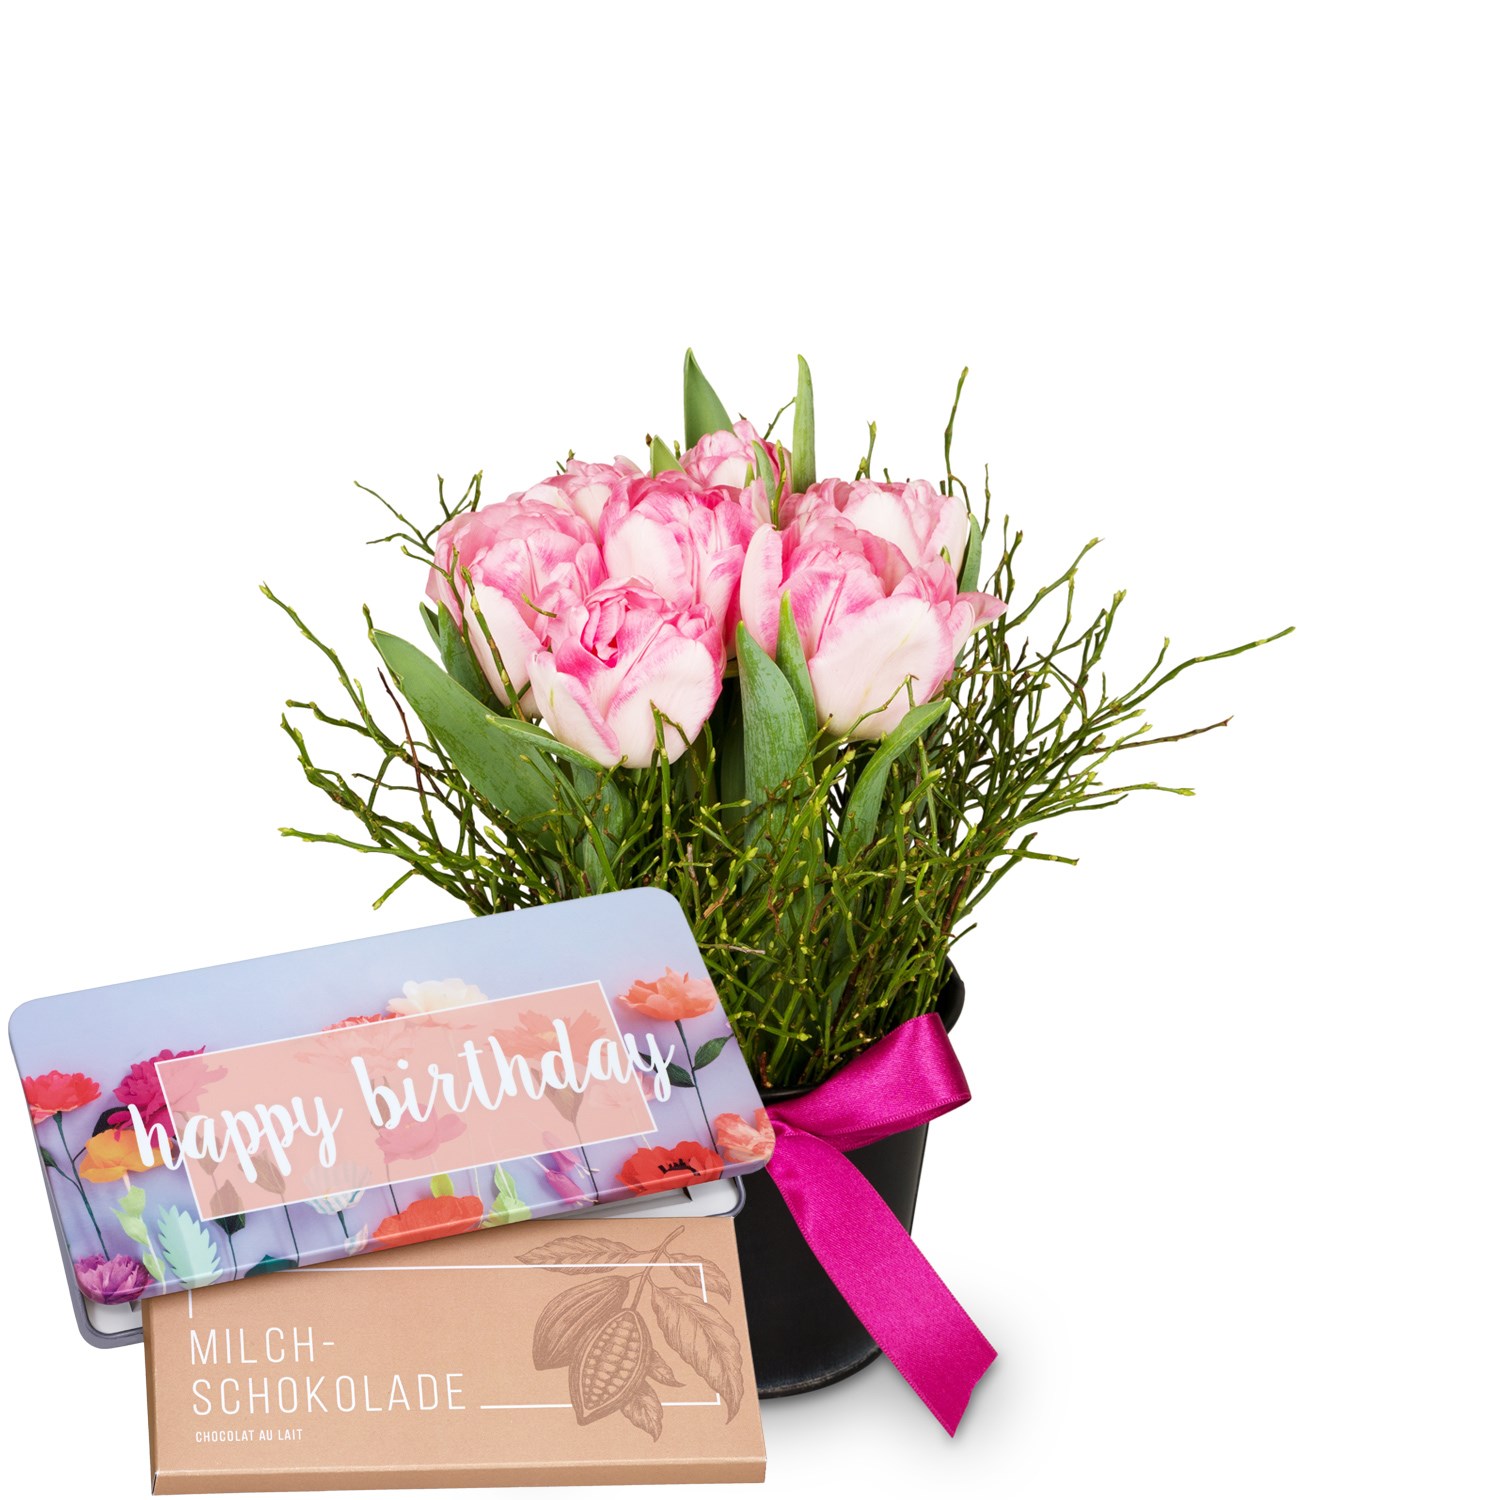 product image for Spring meadow with Munz bar of chocolate «Happy Birthday»